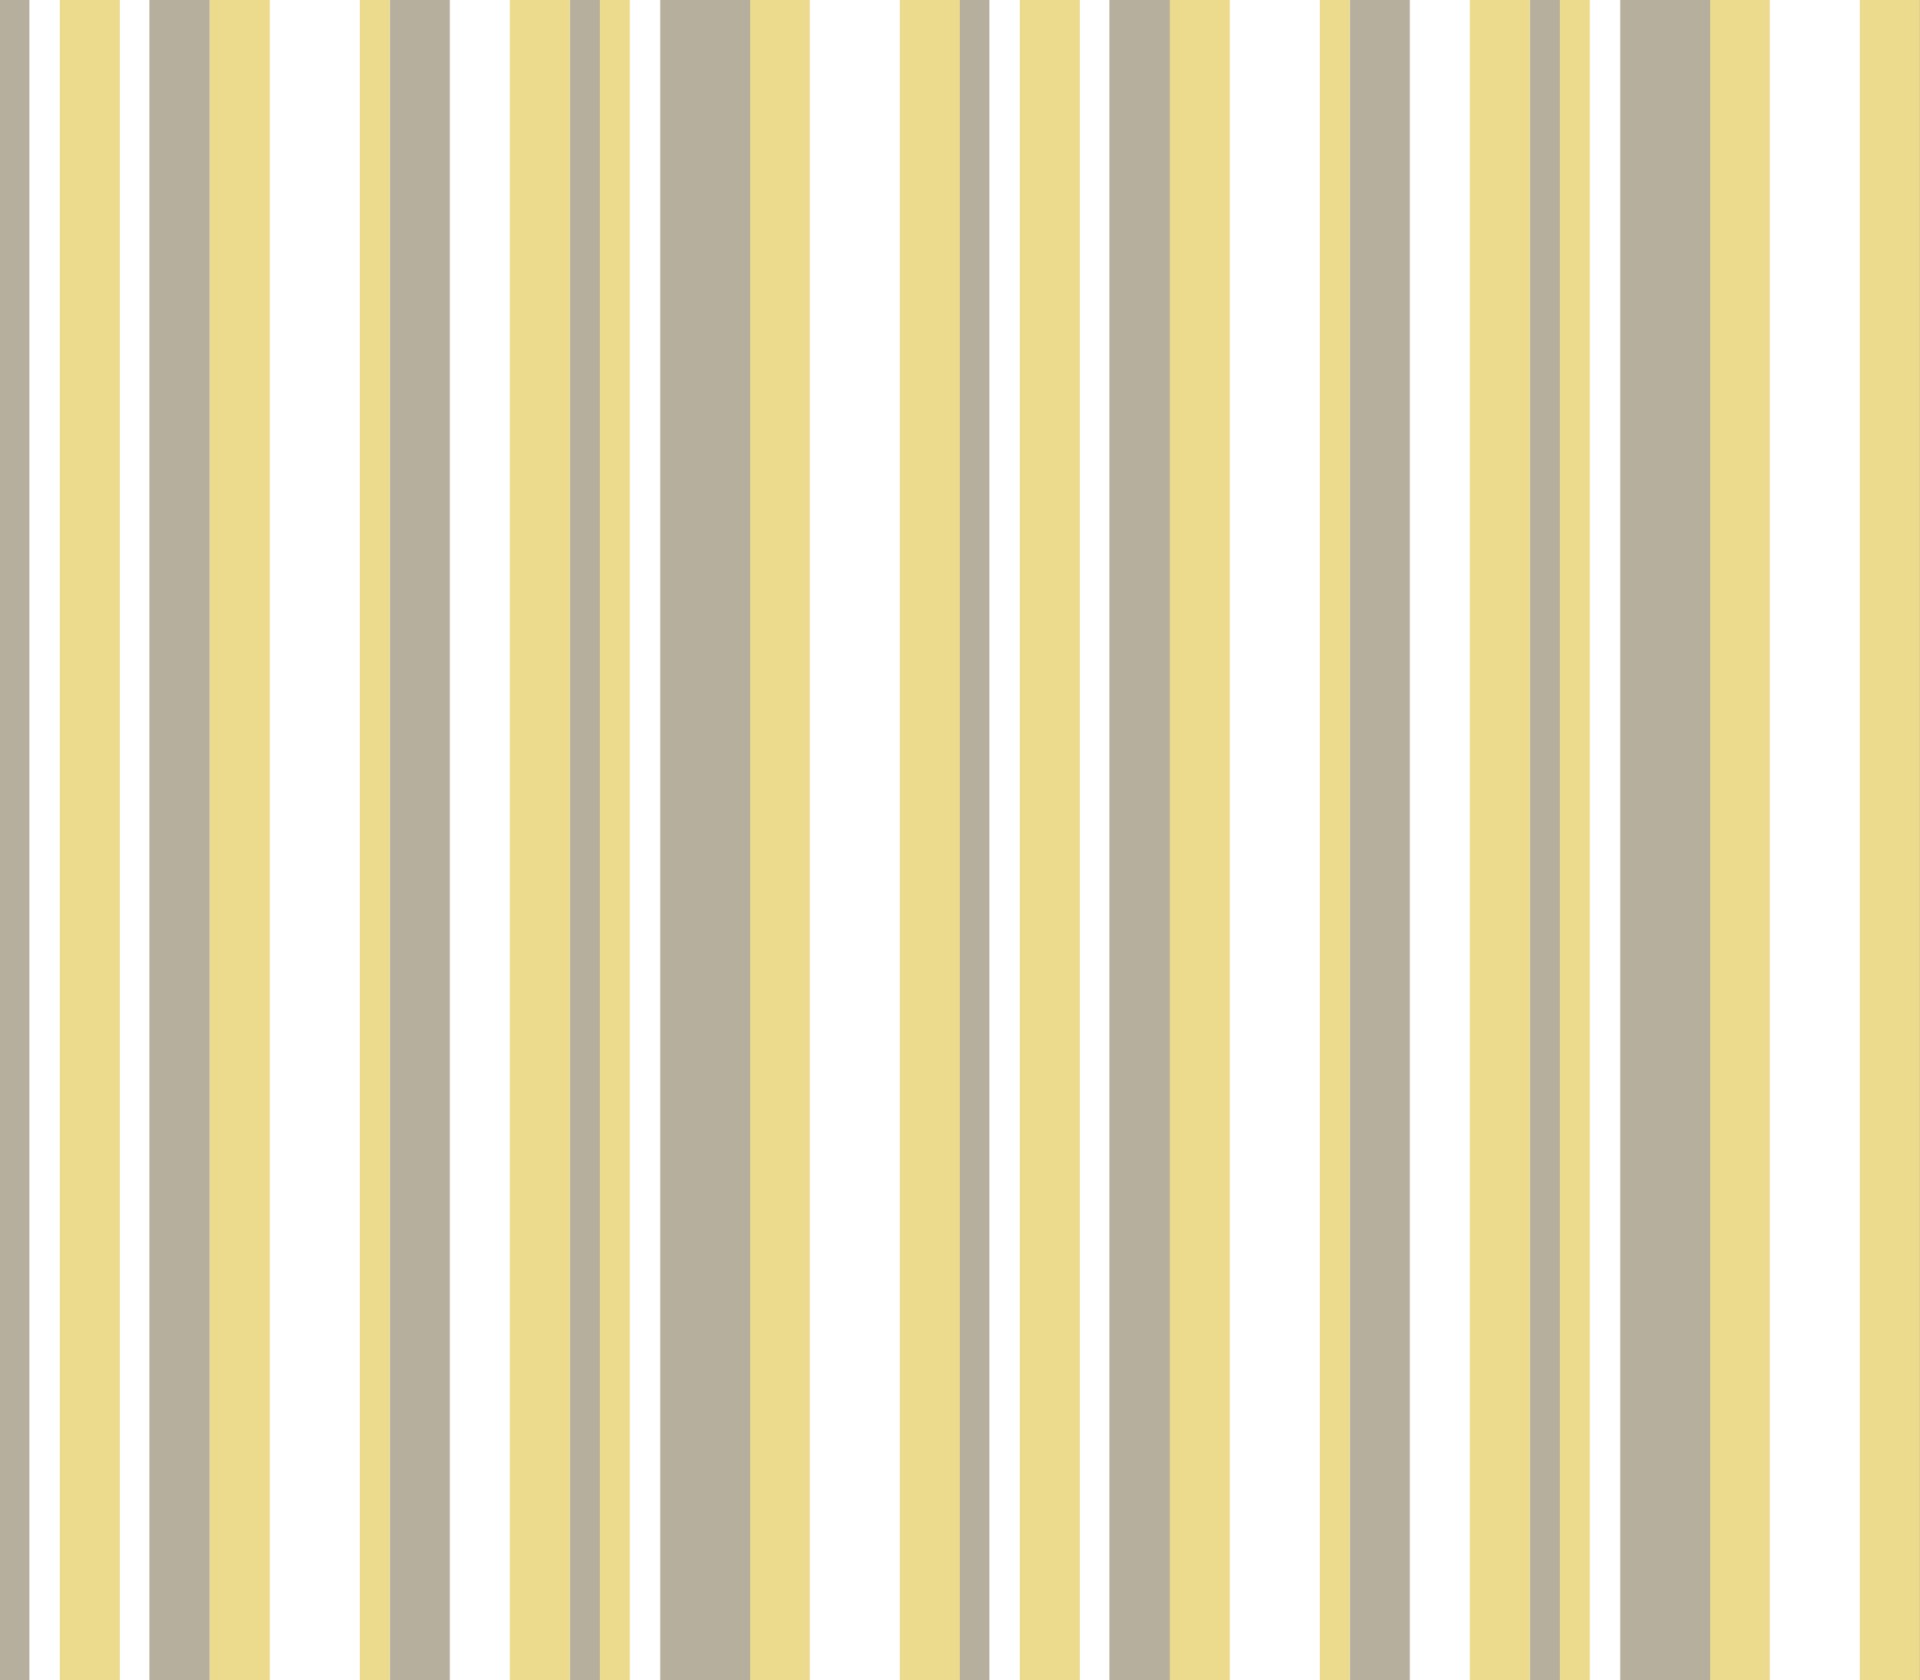 Striped 1 Free Stock Photo   Public Domain Pictures Slides